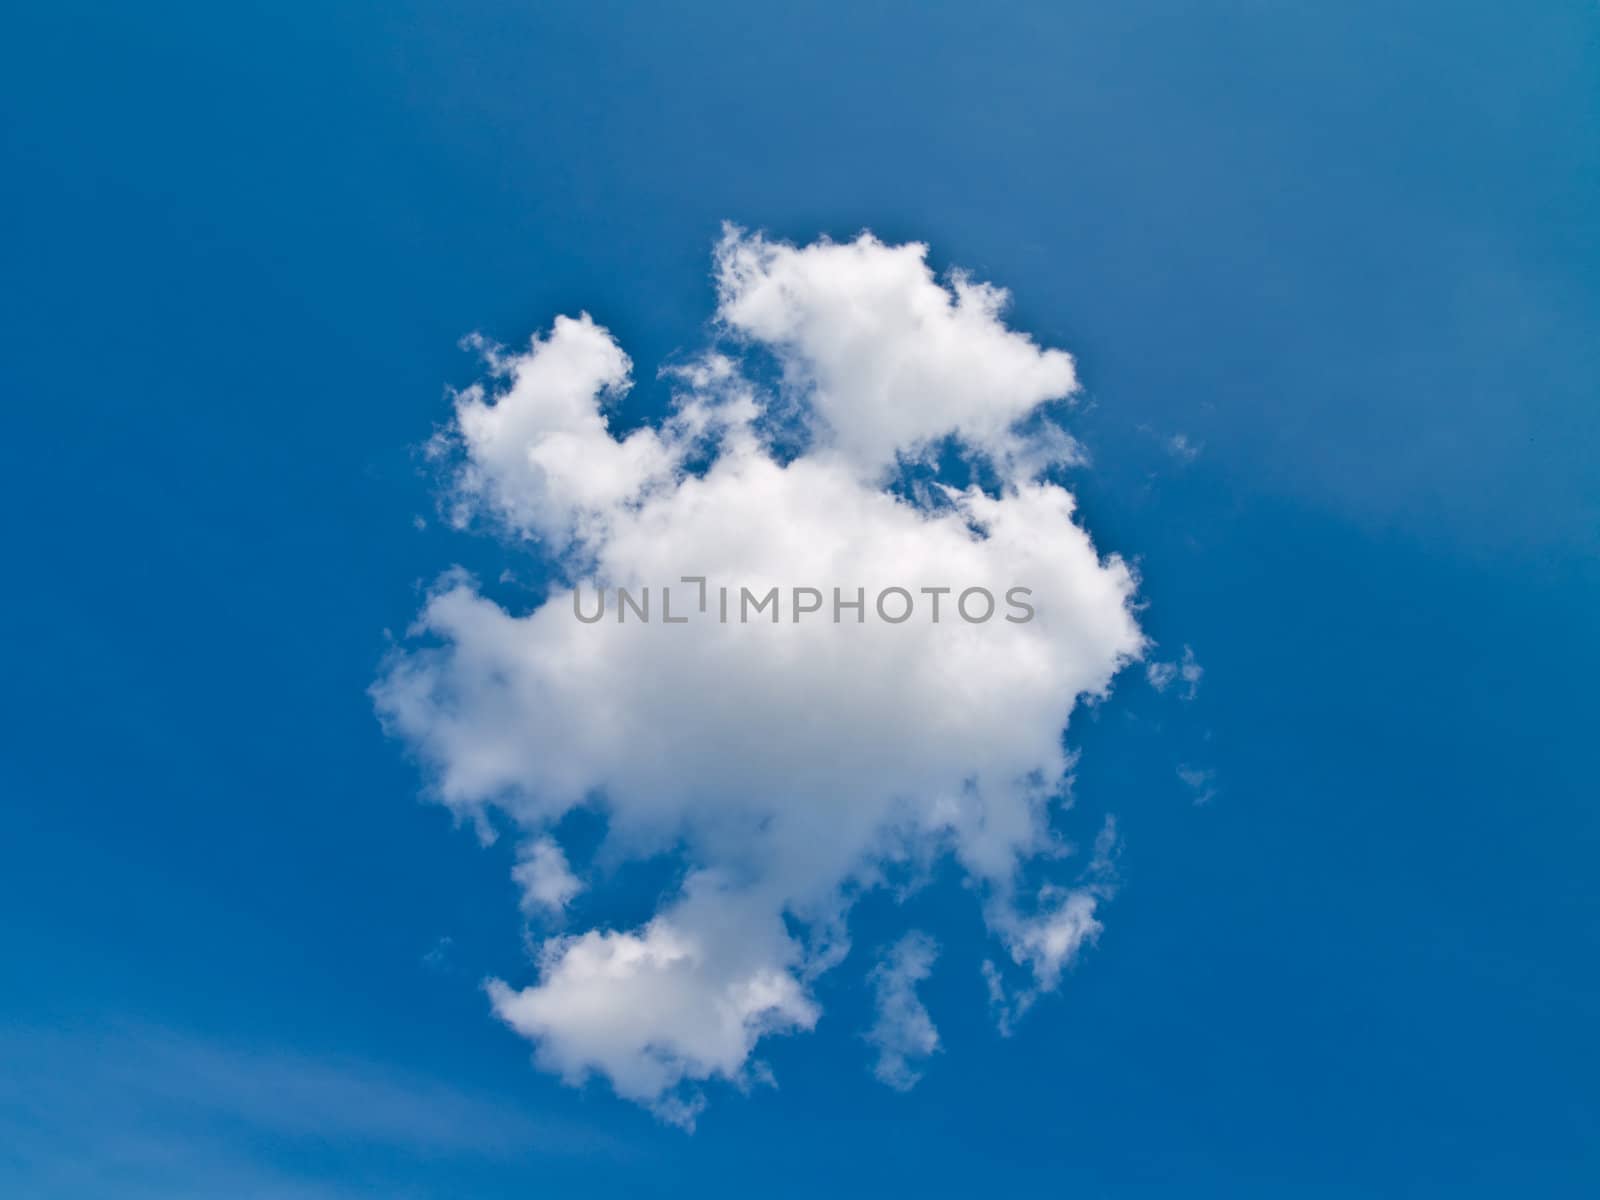 The blue sky and beautiful white cloud